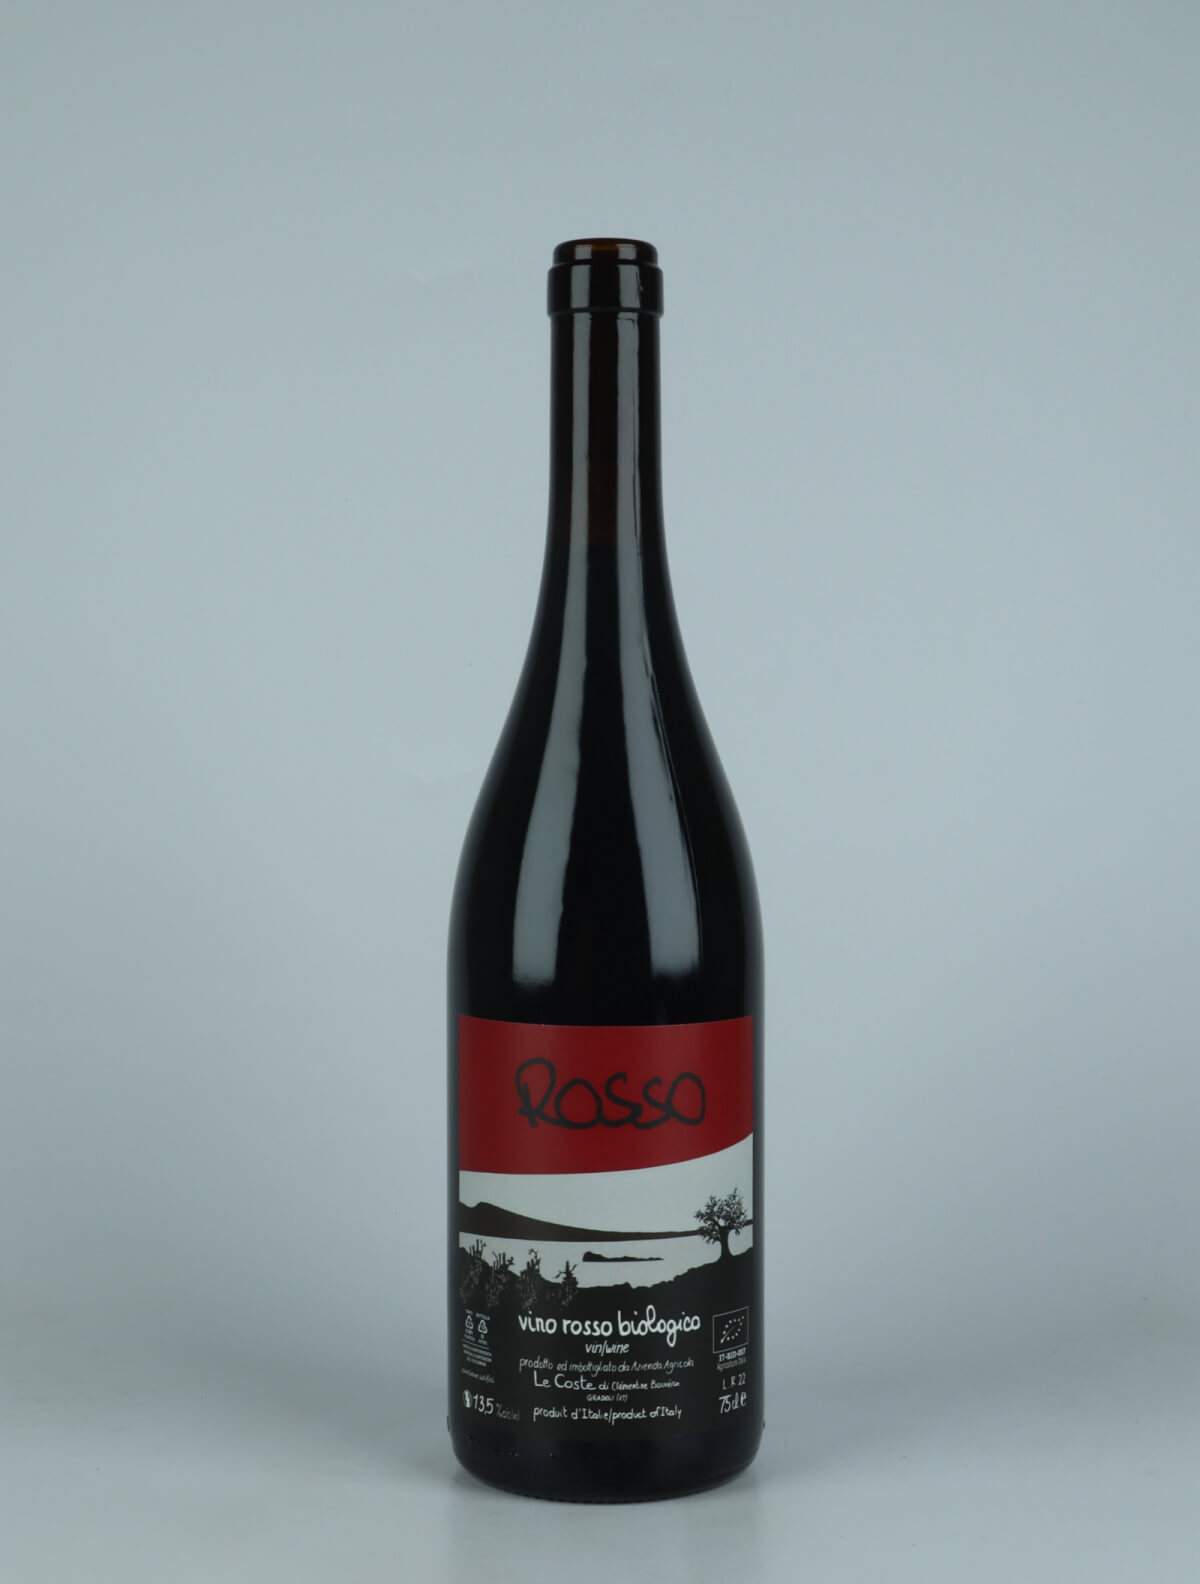 A bottle 2022 Rosso Red wine from Le Coste, Lazio in Italy